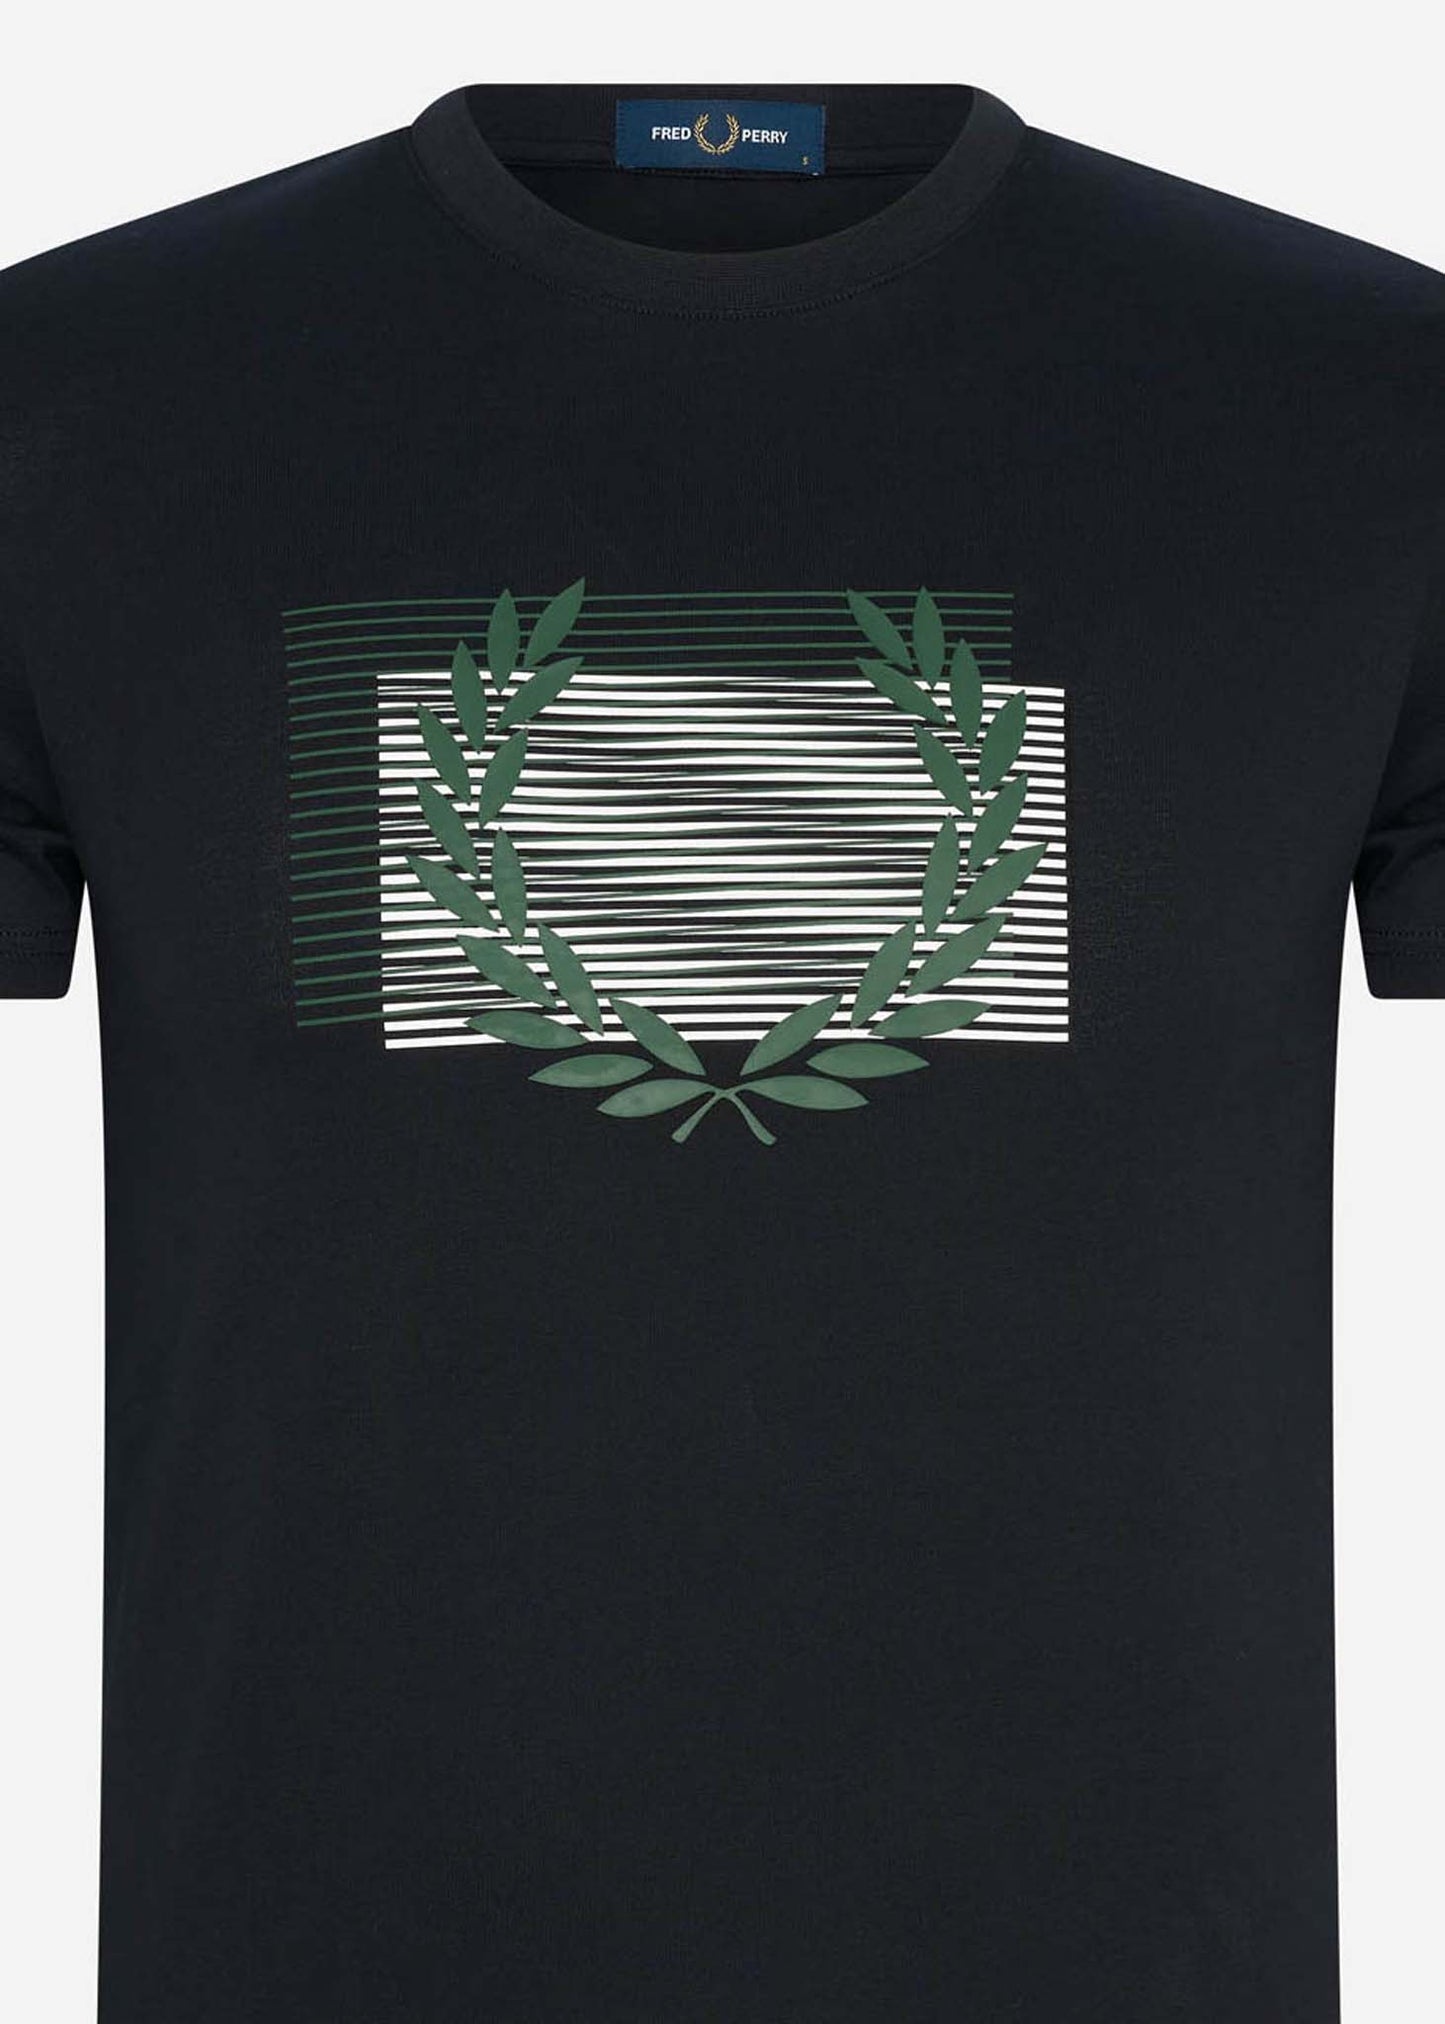 Glitched graphic t-shirt - black